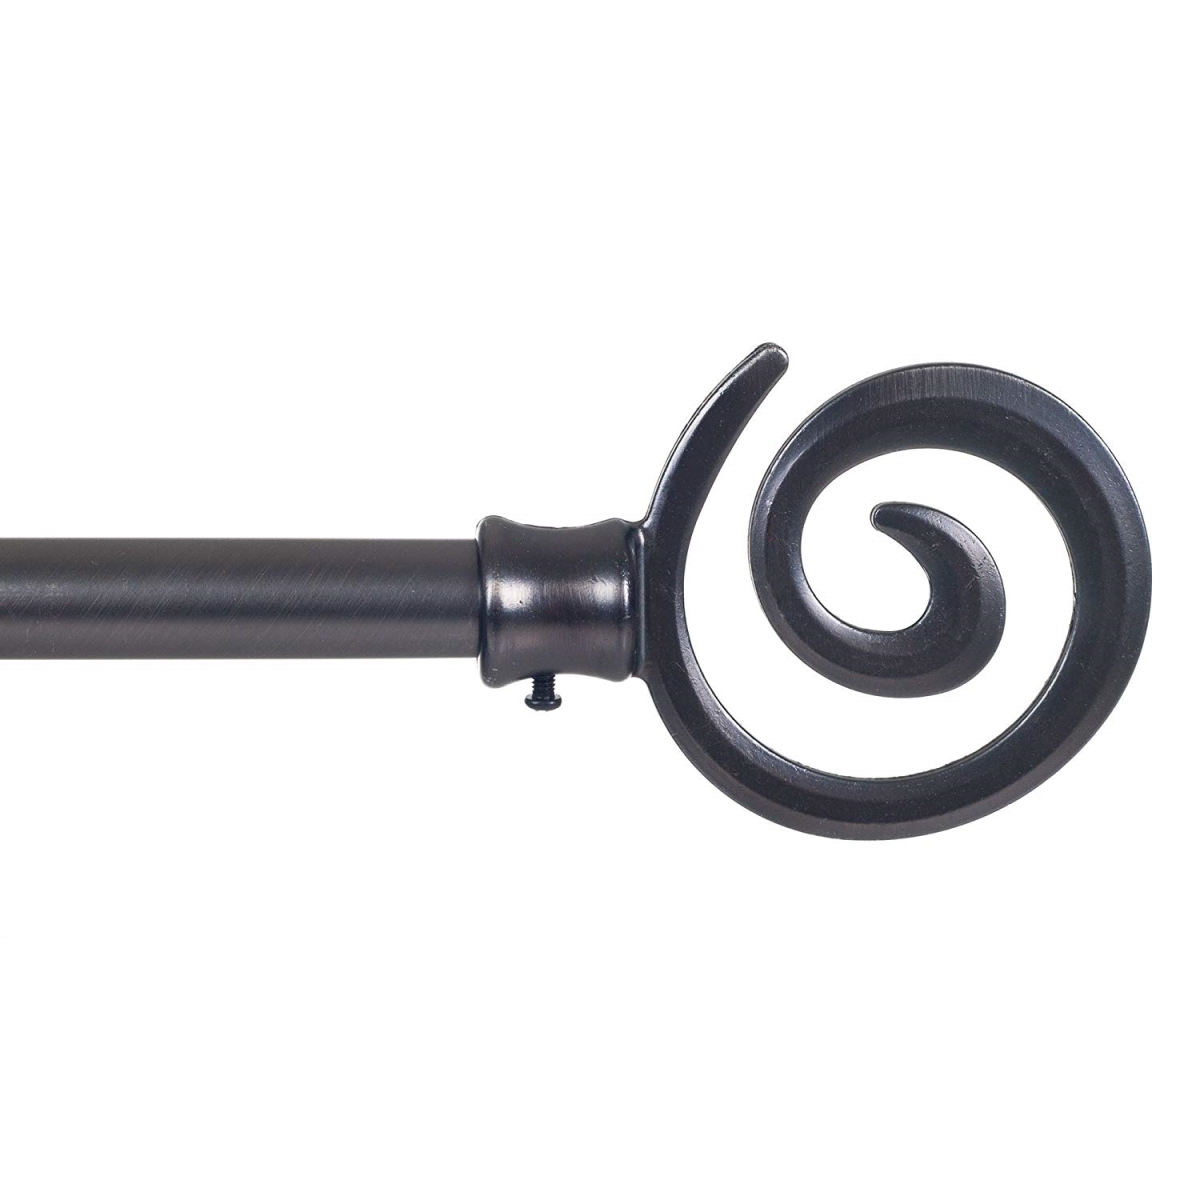 63a-06523 Spiral Curtain Rod, Pewter - 0.75 In.